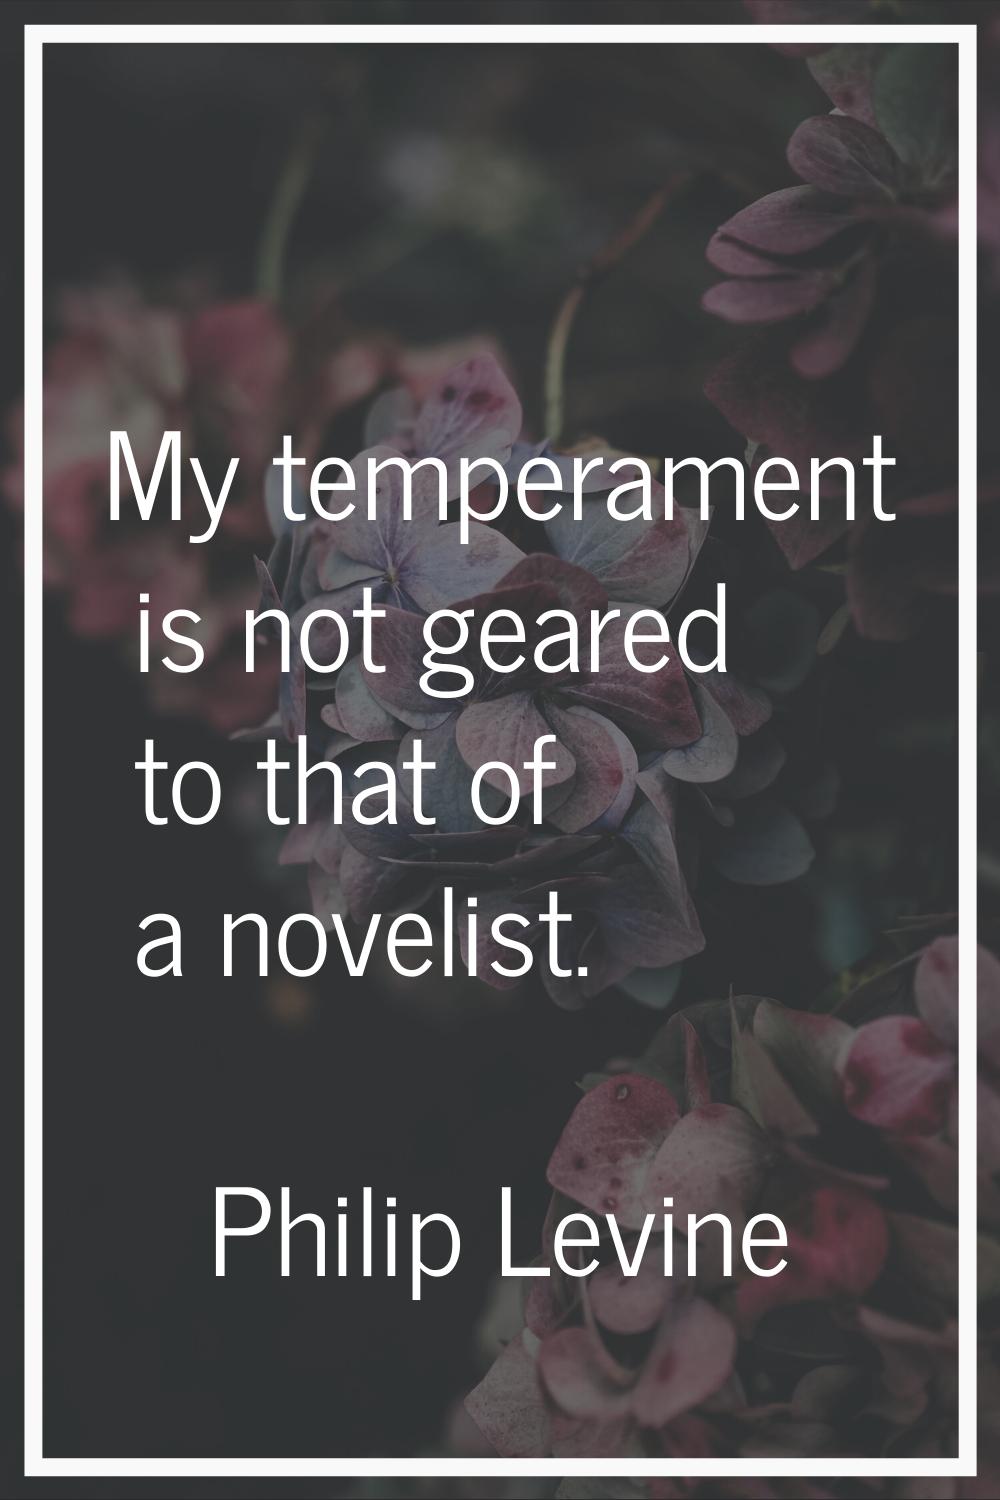 My temperament is not geared to that of a novelist.